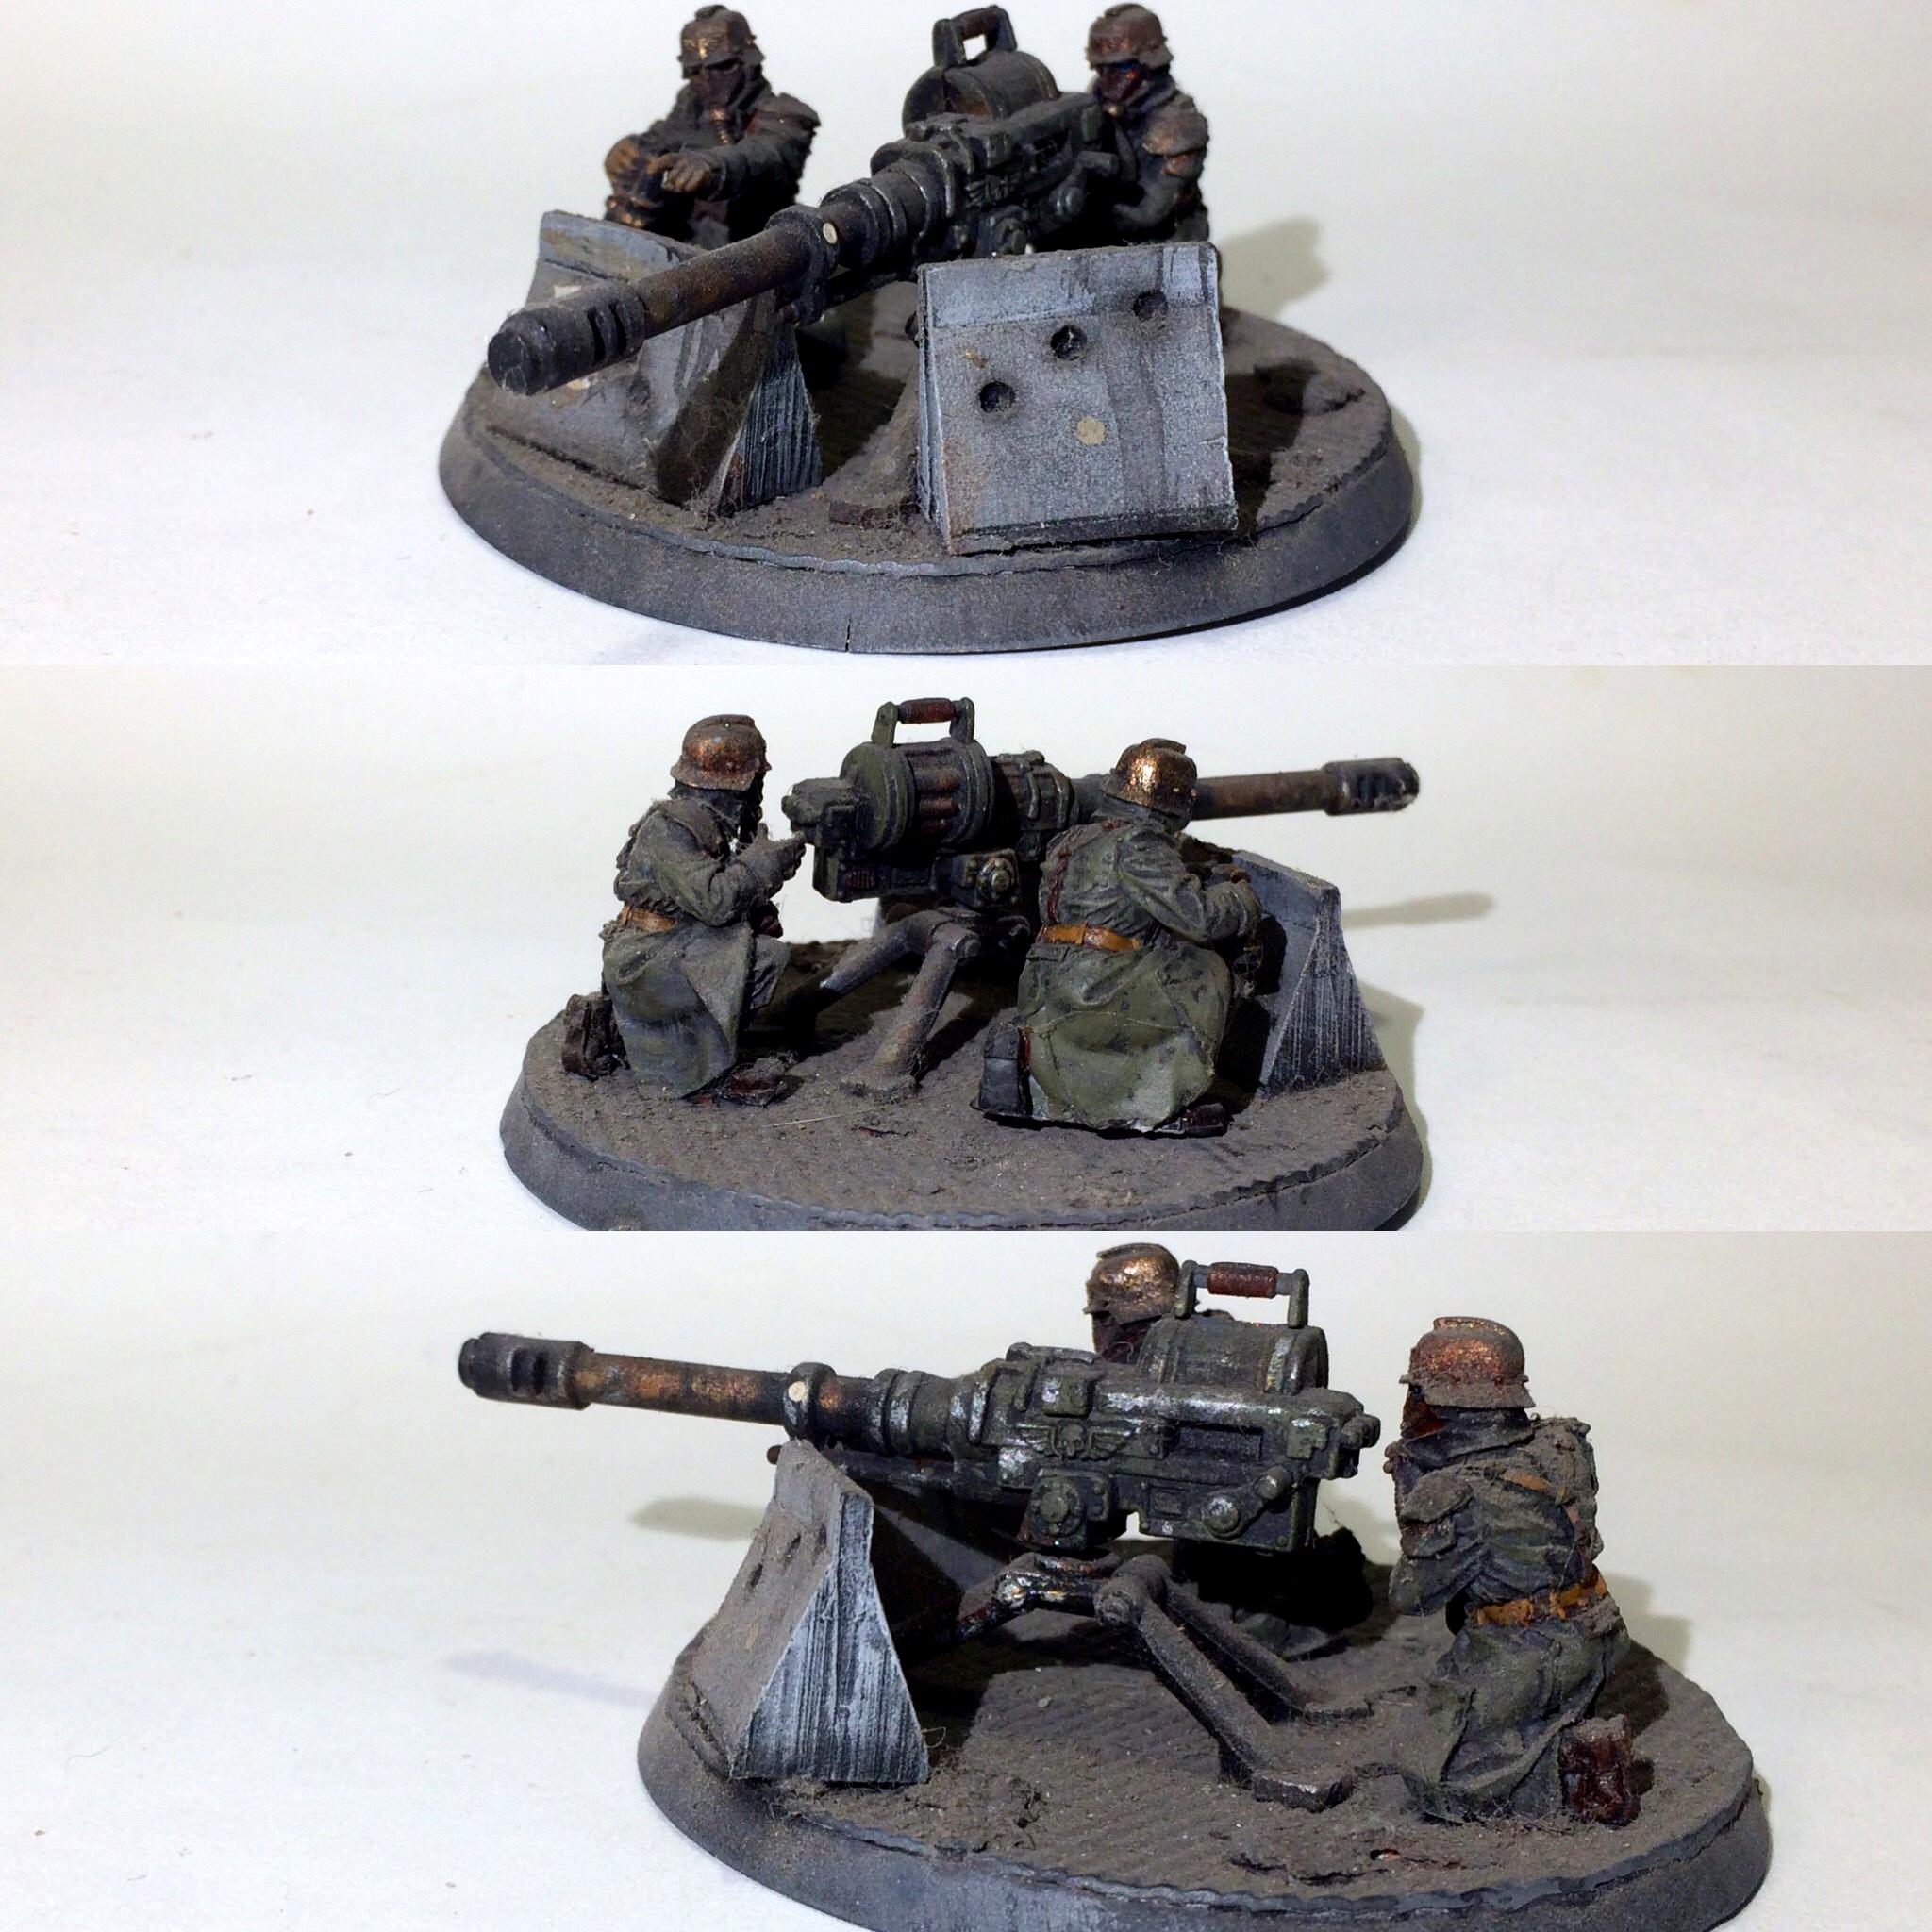 Airbrushed, Astra Militarum, Auto Cannon Team, Custom, Death Korps of Krieg, Flocked, Forge World, Heavy Weapons Team, Infantry, Warhammer 40,000